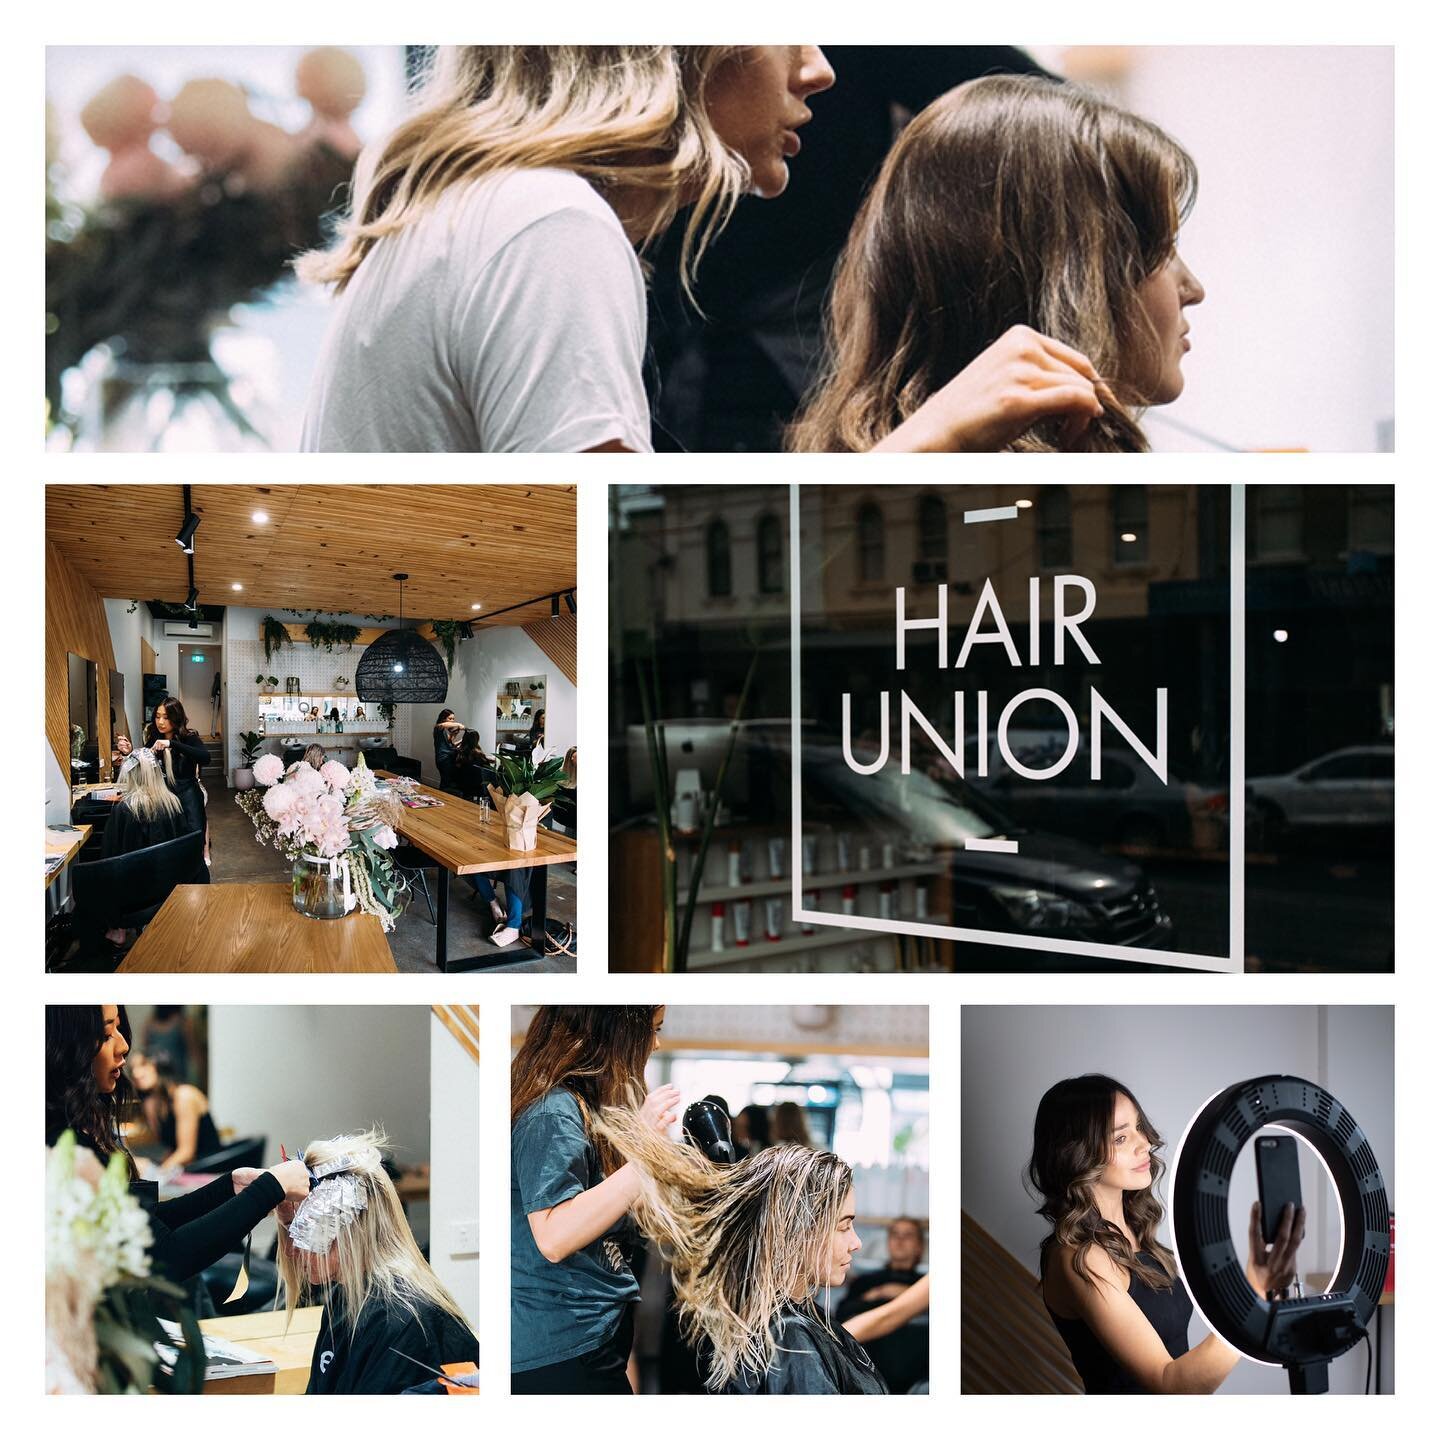 WE ARE HIRING💫 
&bull;1st/2nd Year Apprentice 
&bull; Qualified Hairdresser 

Are you looking for a fun, new creative workspace with ongoing rewards and recognition? Or are you passionate about a new career in hairdressing? We got you! 

The Hair Un